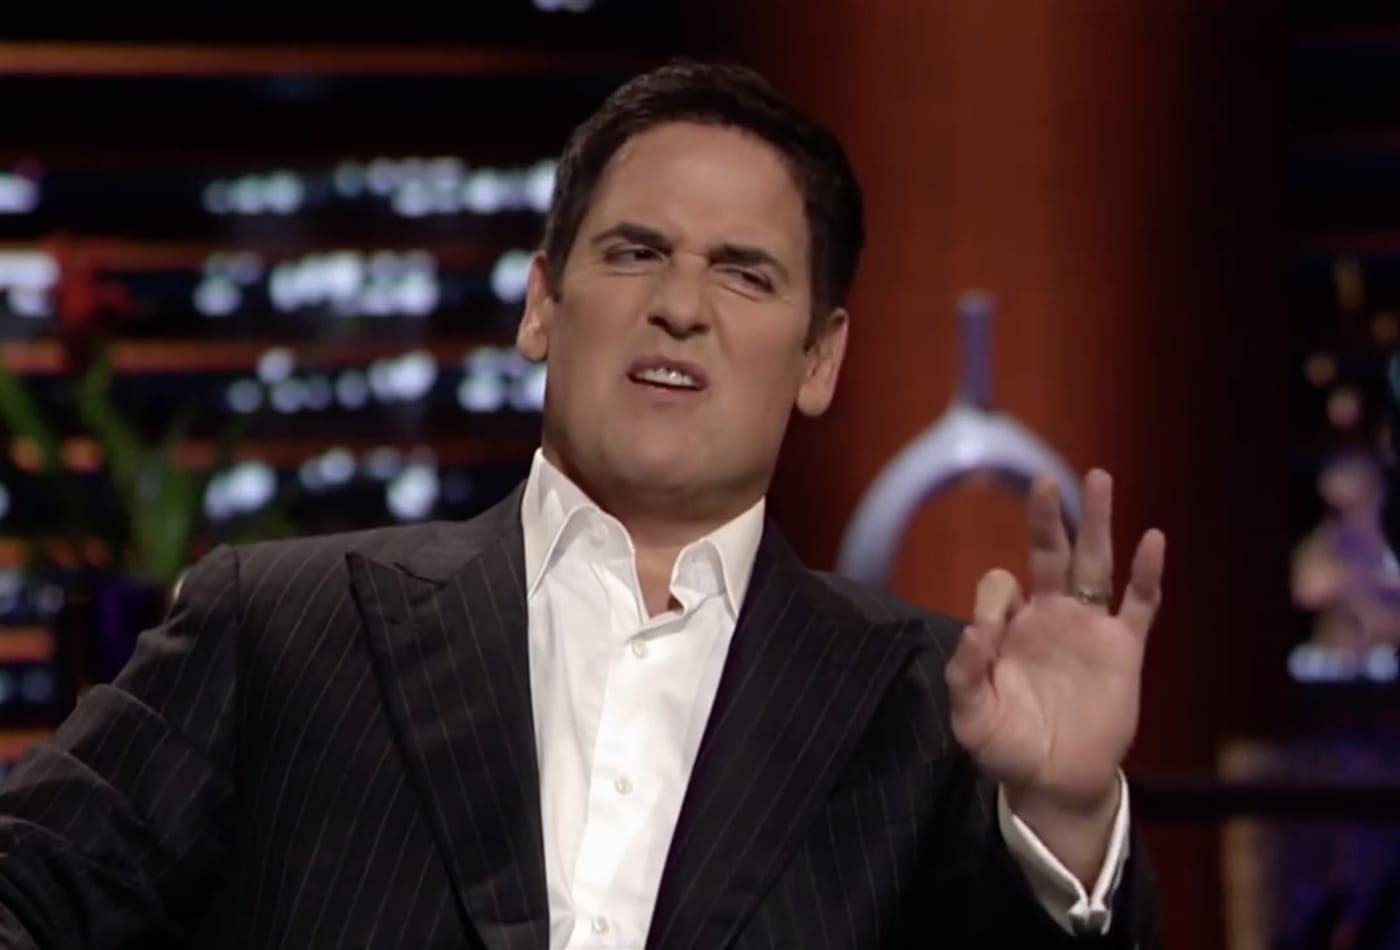 Mark Cuban Purposes A $1,000 Stimulus Every 2 Weeks For The Next 2 Months